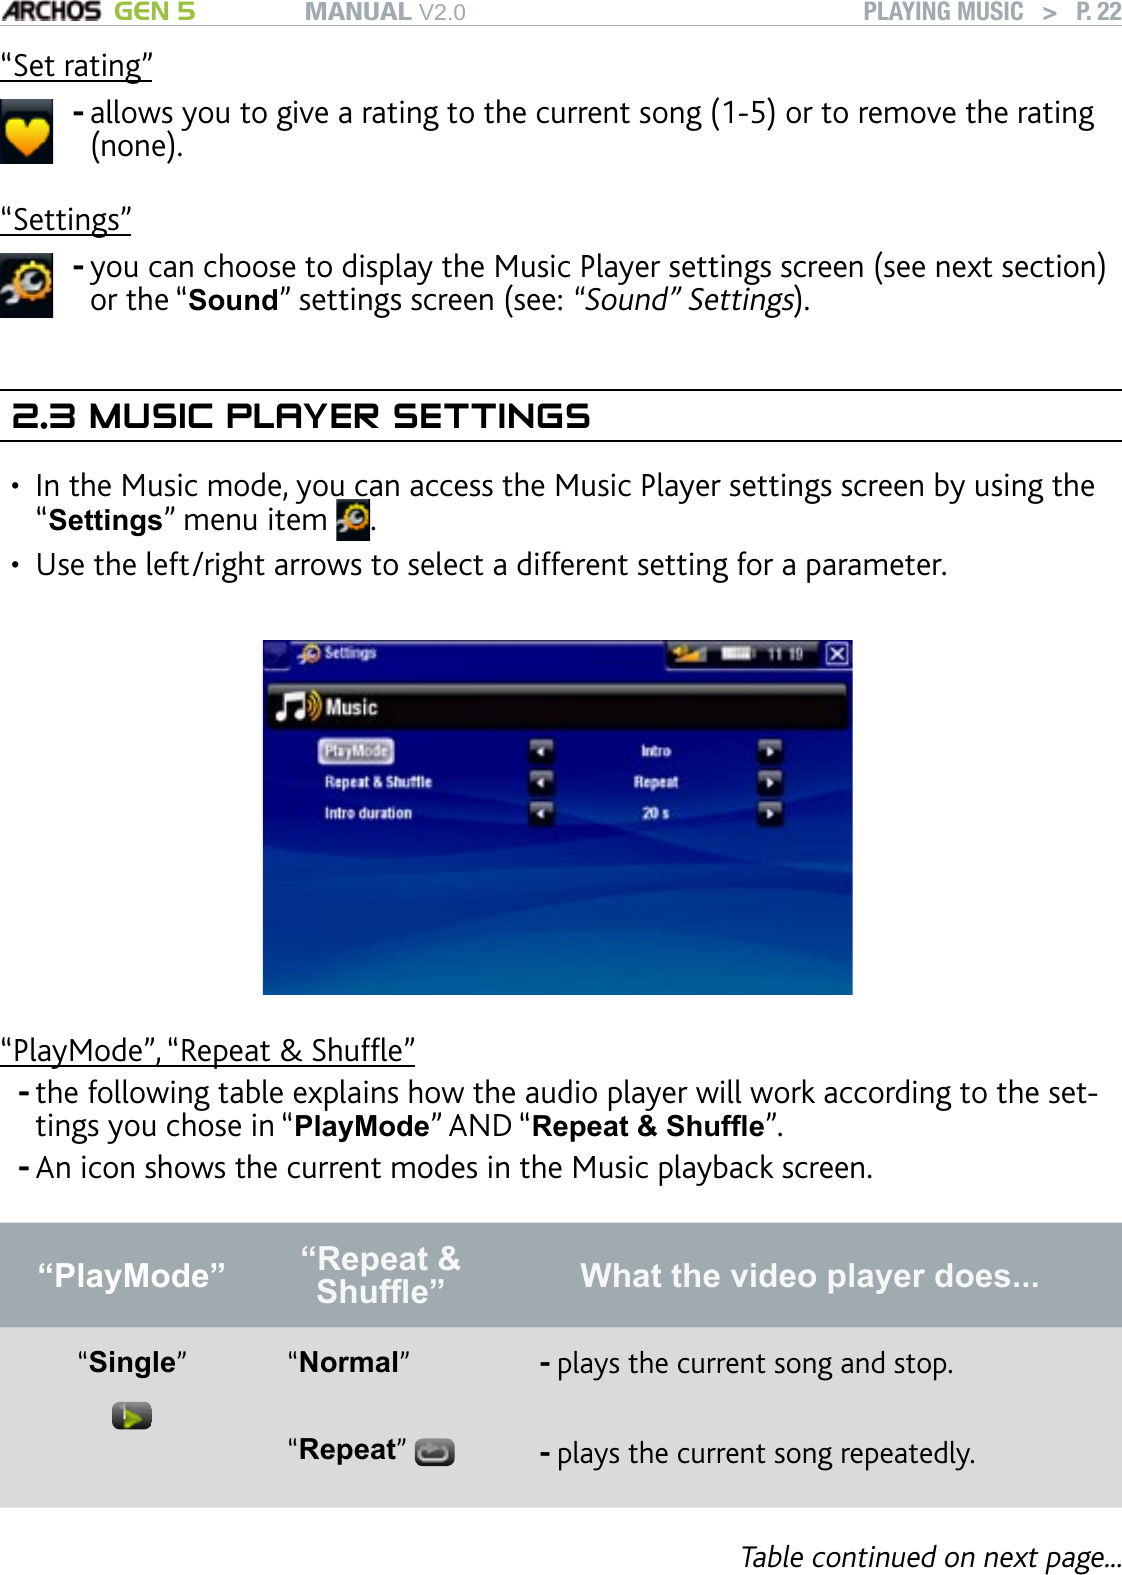 MANUAL V2.0 GEN 5 PLAYING MUSIC   &gt;   P. 22“Set rating”allows you to give a rating to the current song (1-5) or to remove the rating (none).-“Settings”you can choose to display the Music Player settings screen (see next section) or the “Sound” settings screen (see: “Sound” Settings).-2.3 MUSIC PLAYER SETTINGSIn the Music mode, you can access the Music Player settings screen by using the “Settings” menu item  . Use the left/right arrows to select a different setting for a parameter.“PlayMode”, “Repeat &amp; Shufe”the following table explains how the audio player will work according to the set-tings you chose in “PlayMode” AND “Repeat &amp; Shufe”. An icon shows the current modes in the Music playback screen.“PlayMode”  “Repeat &amp; Shufe” What the video player does...“Single”“Normal”  plays the current song and stop.-“Repeat” plays the current song repeatedly.-Table continued on next page...••--